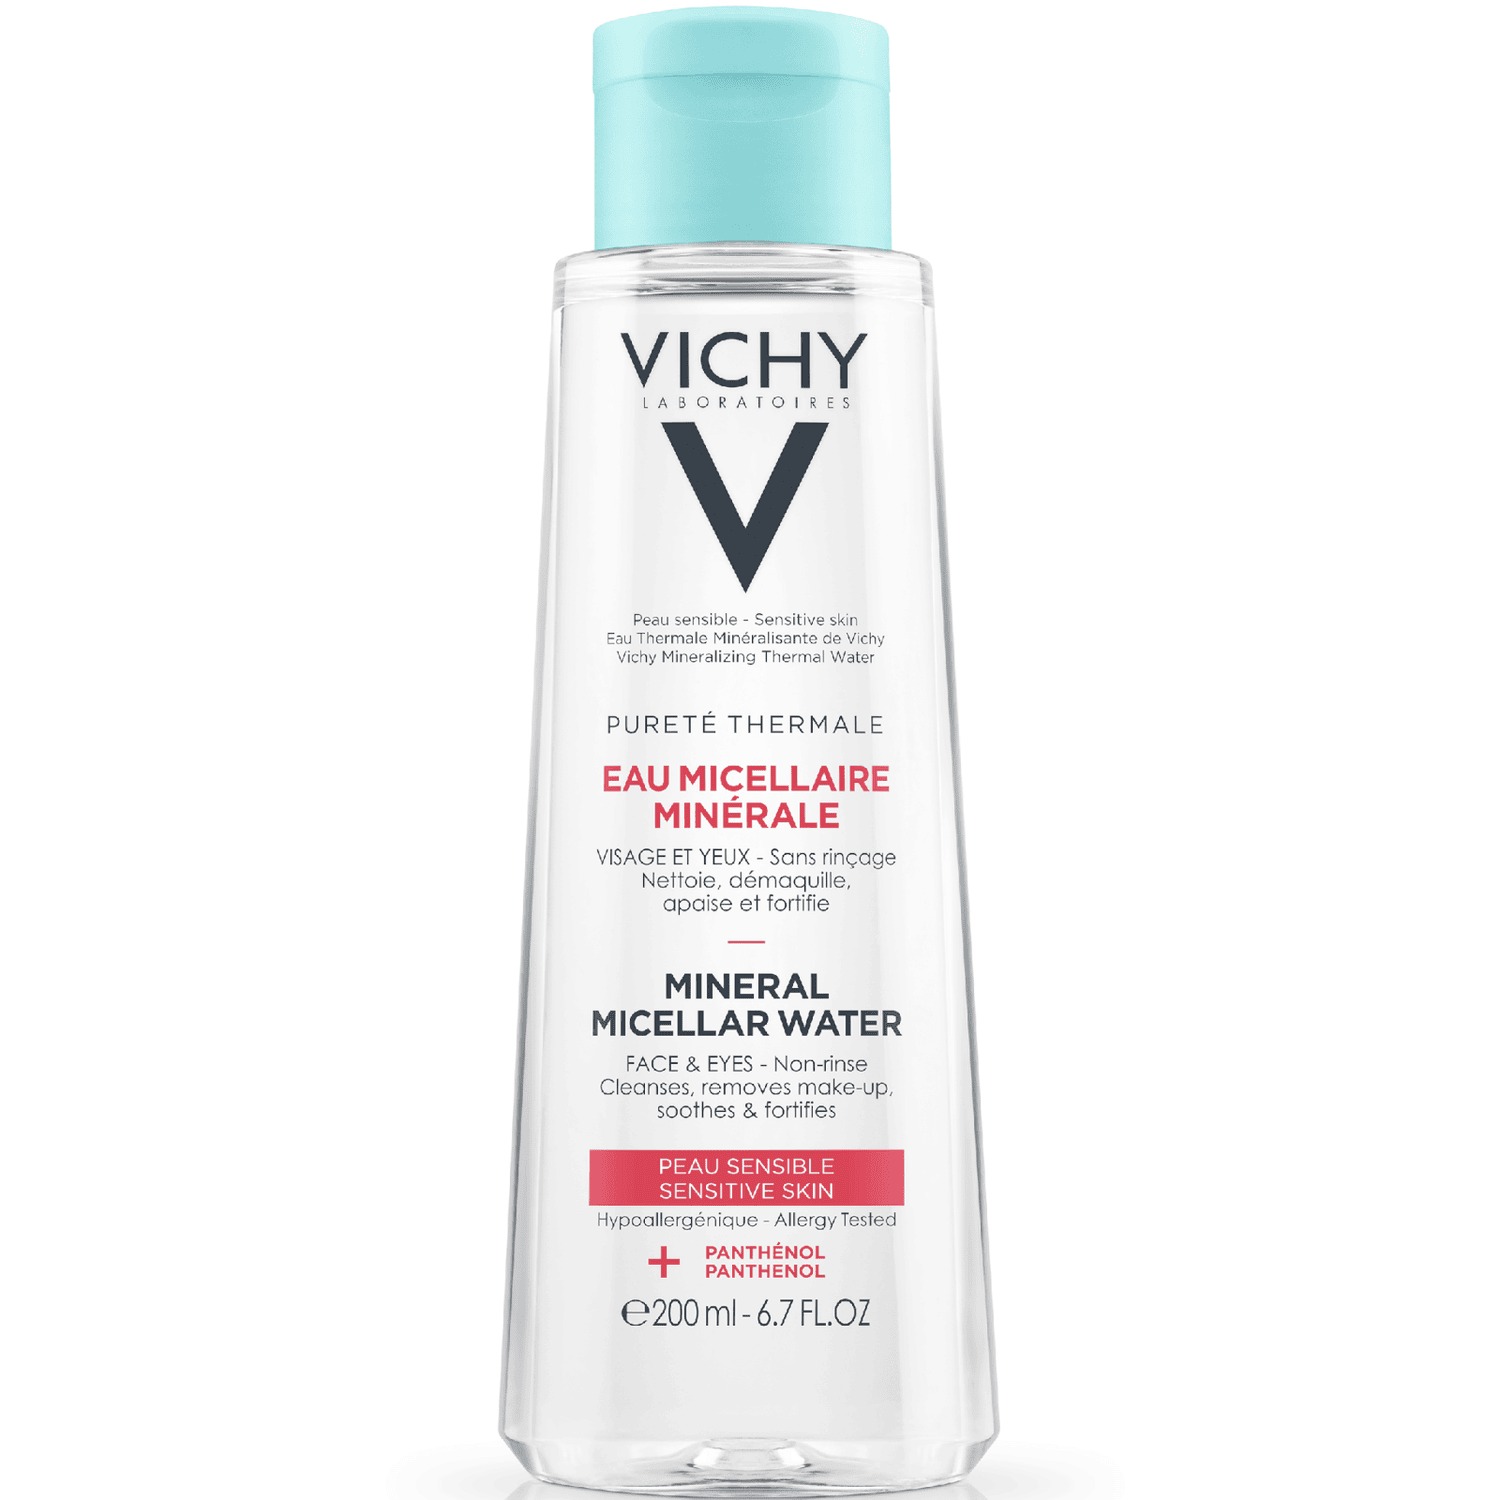 Vichy Pureté Thermale Micellar Cleansing Water 3-in-1 One Step Cleanser and Makeup Remover, 6.76 Fl. Oz.